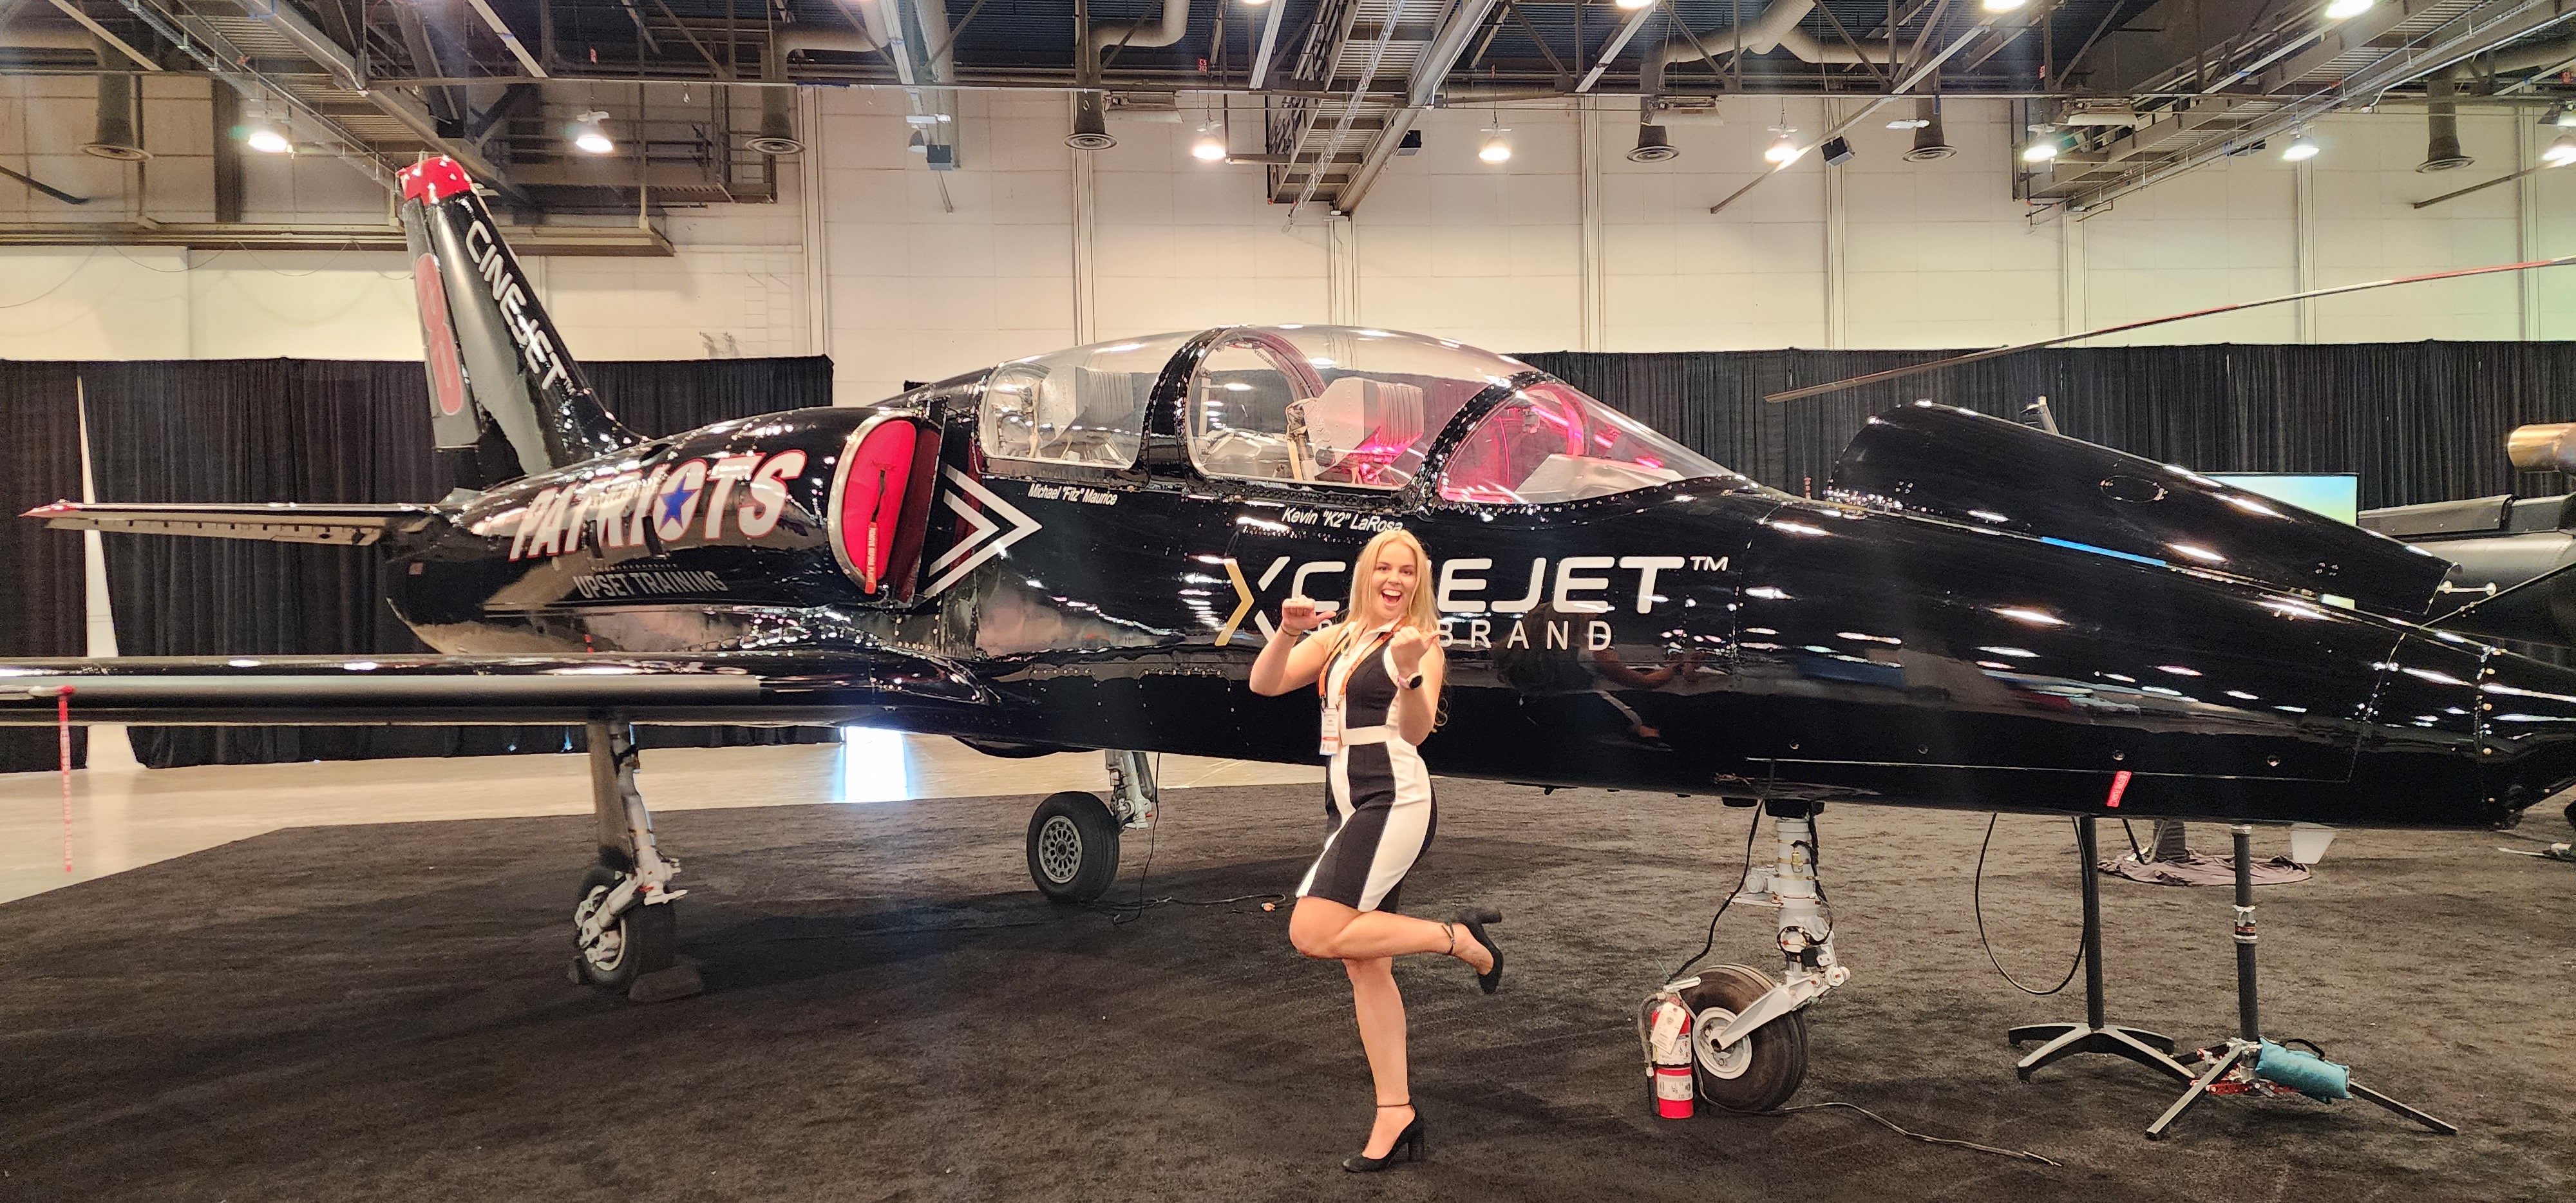 Anna standing in front of jet used to help film the movie 